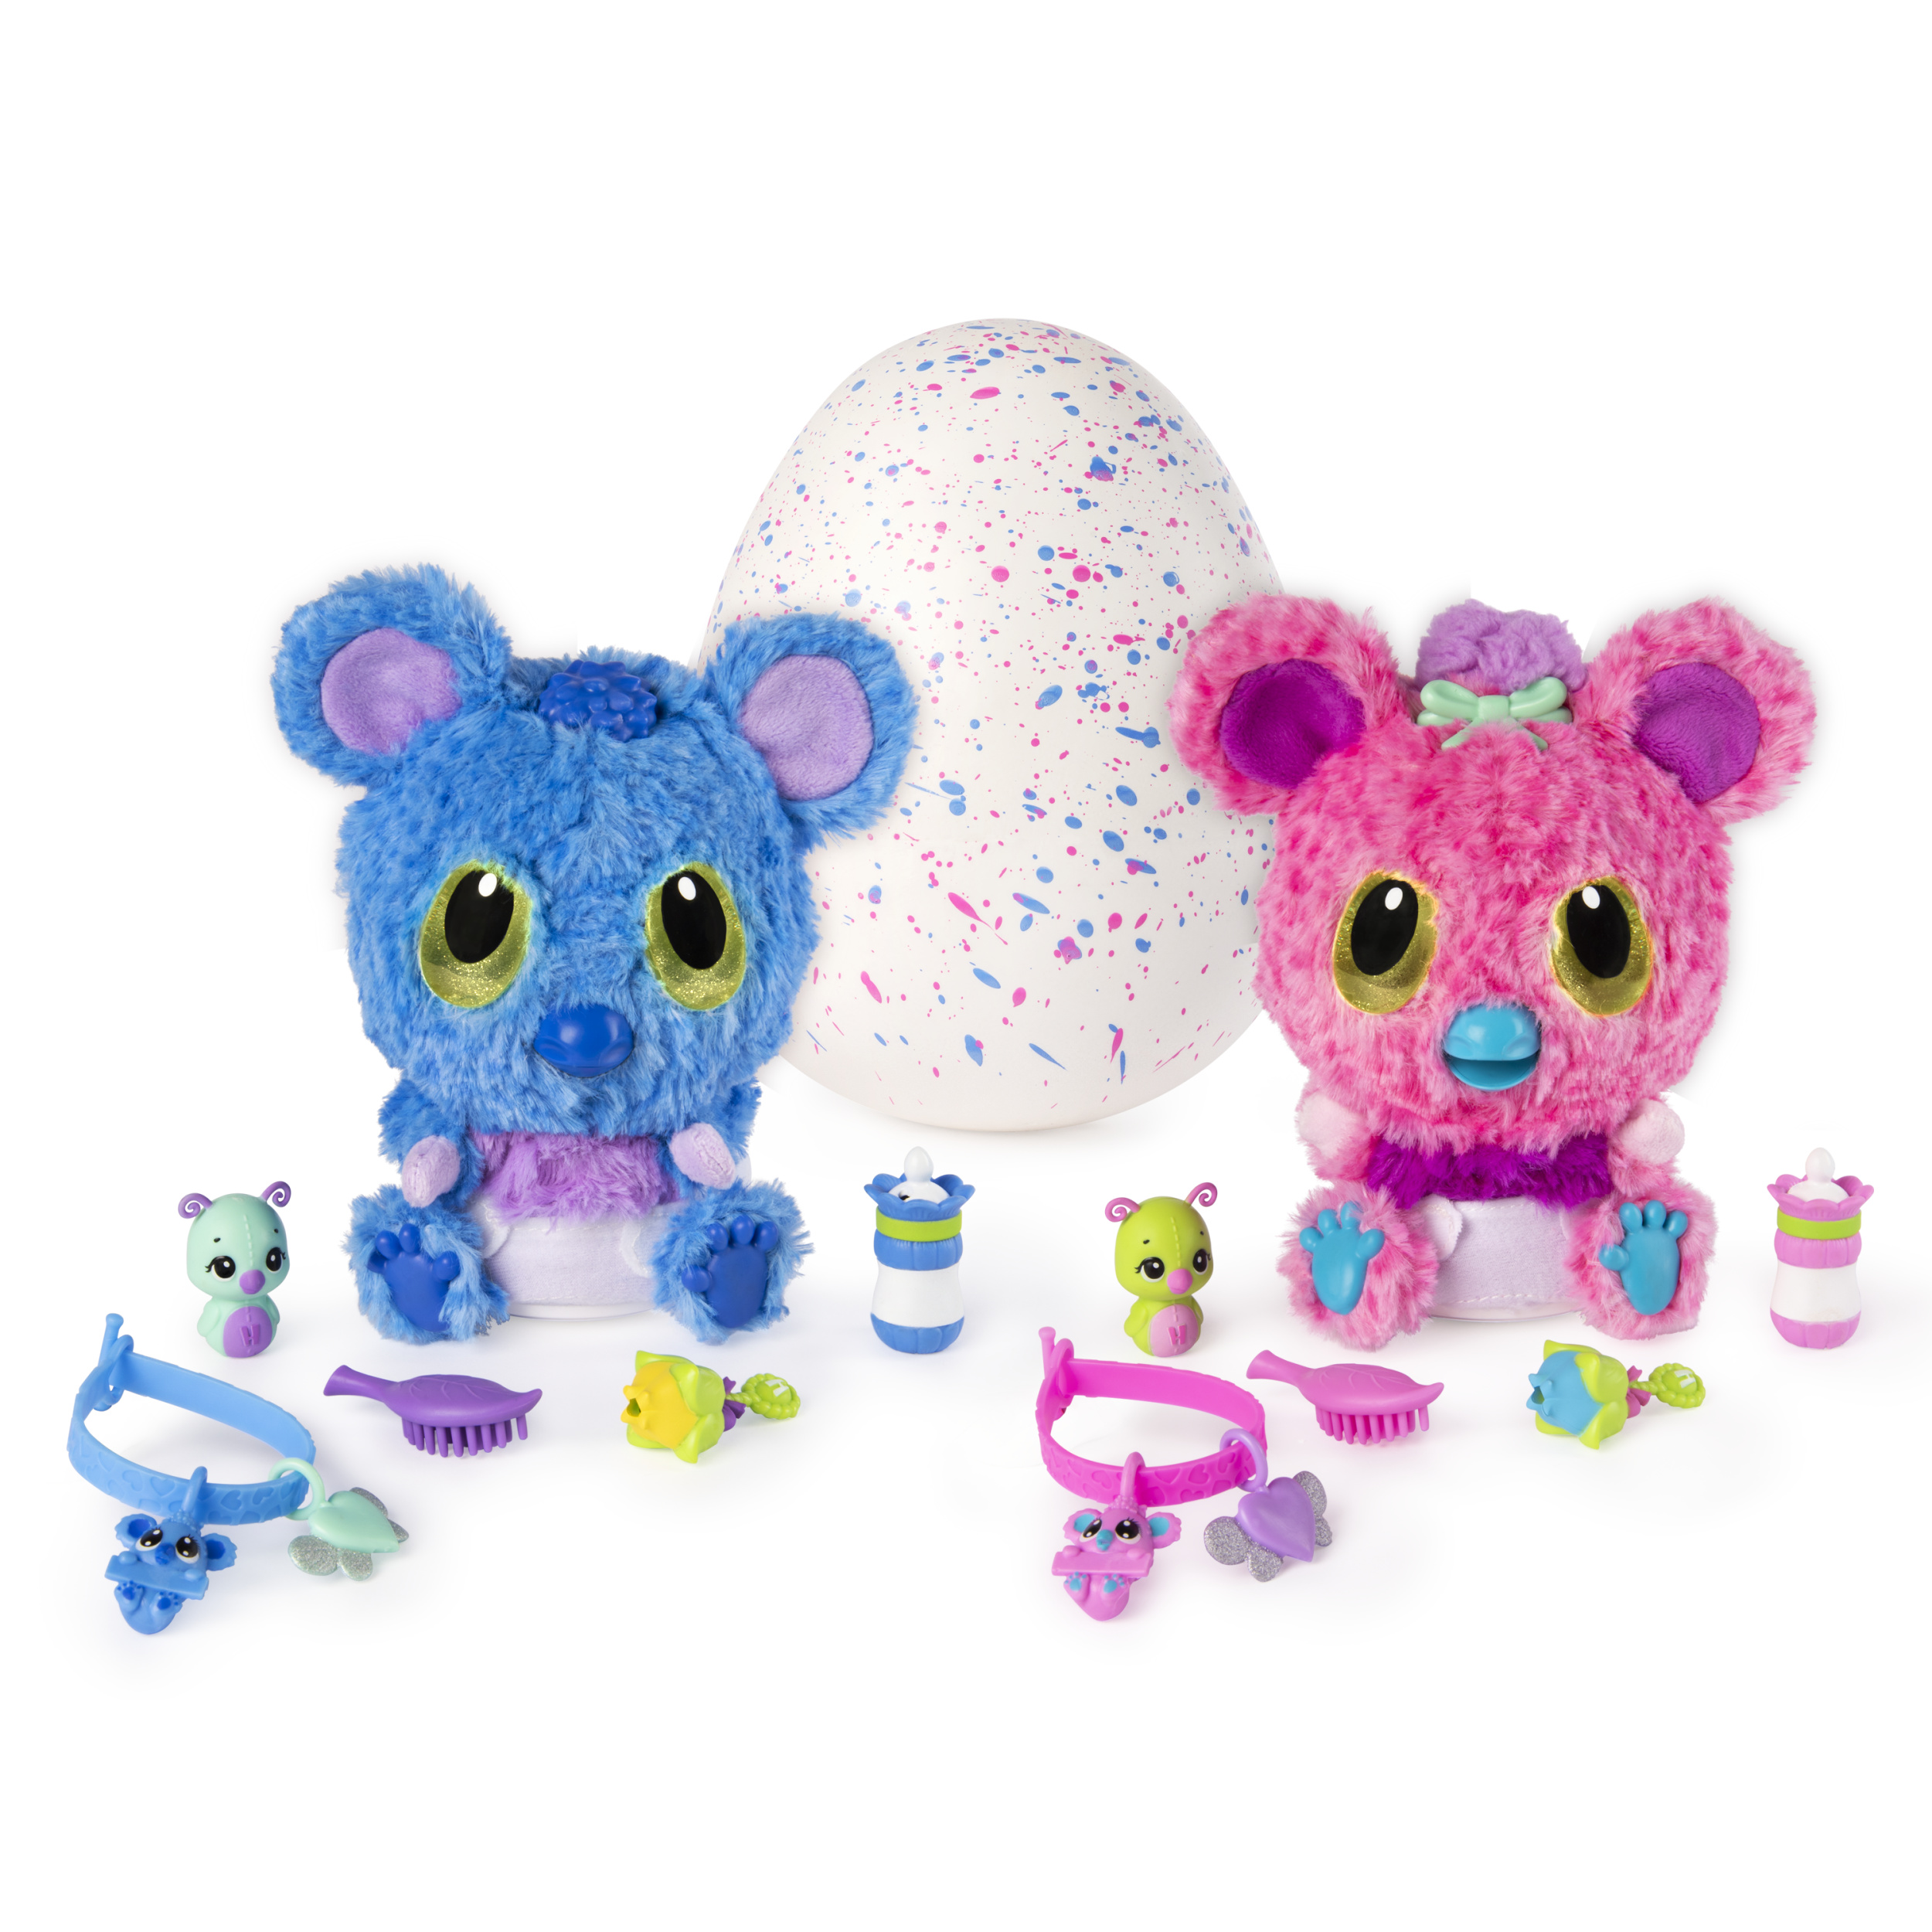 Hatchimals HatchiBabies Koalabee, Hatching Egg with Interactive Toy, Baby Koala Pet, Walmart Exclusive, for Ages 5 and Up - image 1 of 8